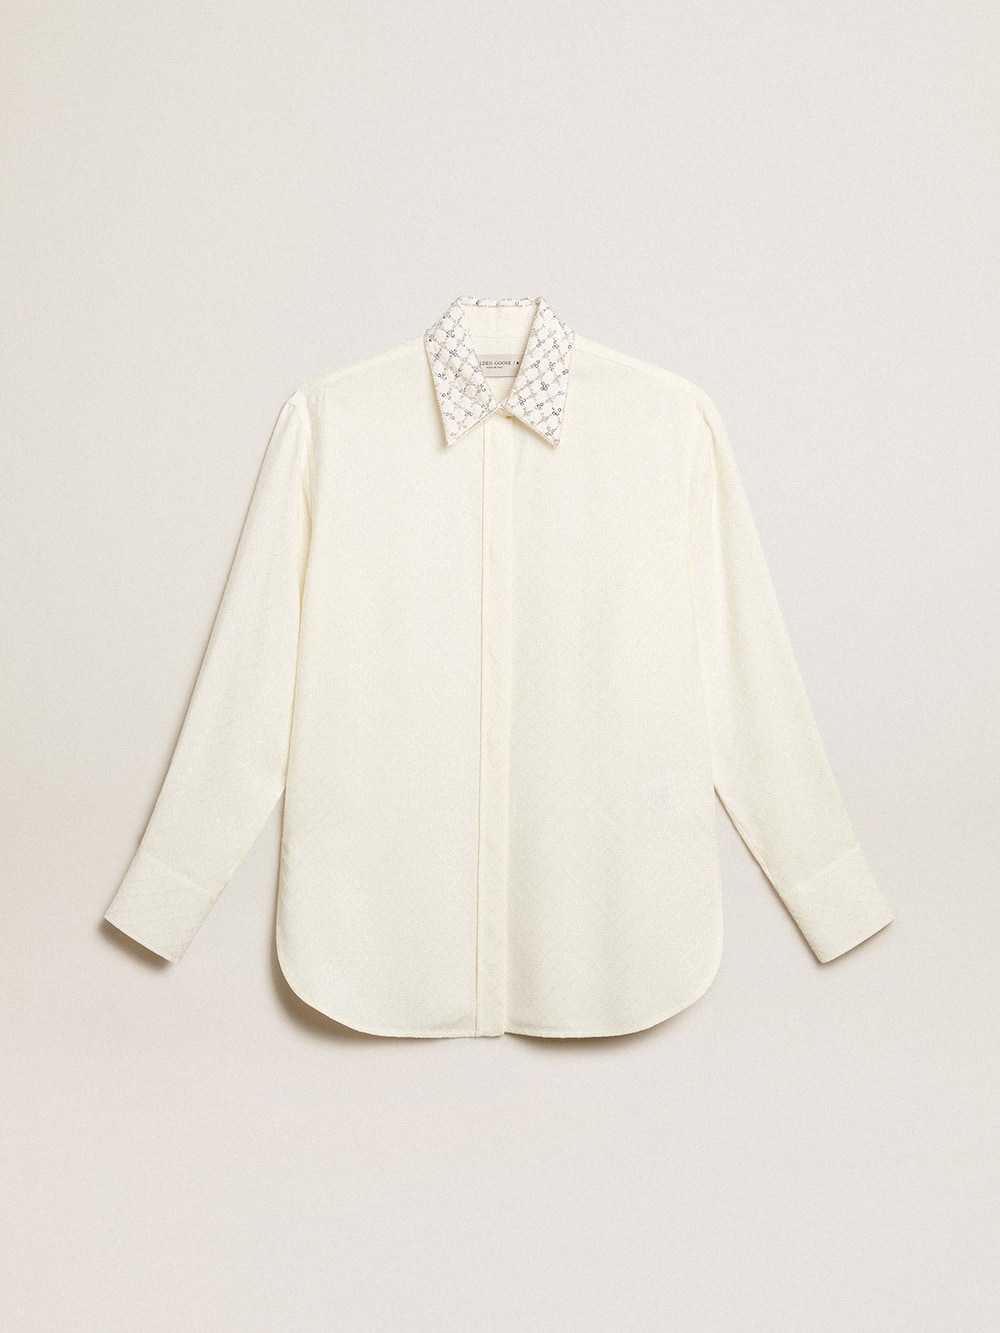 Golden Goose - Shirt in vintage white with jacquard design and embroidery in 